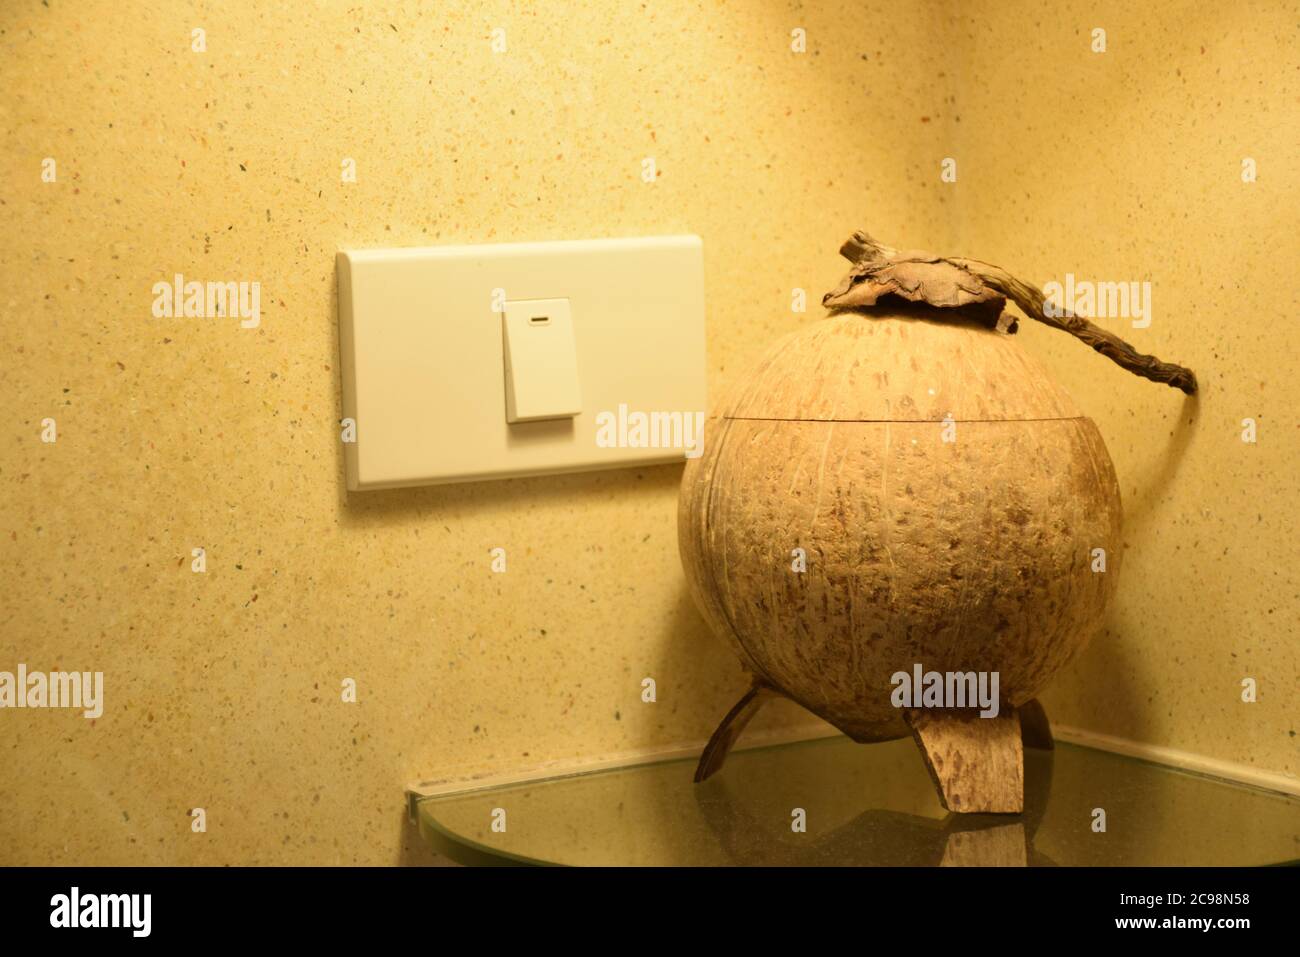 lighting Switch and Recycle a Coconut shell Bucket in Bathroom Stock Photo